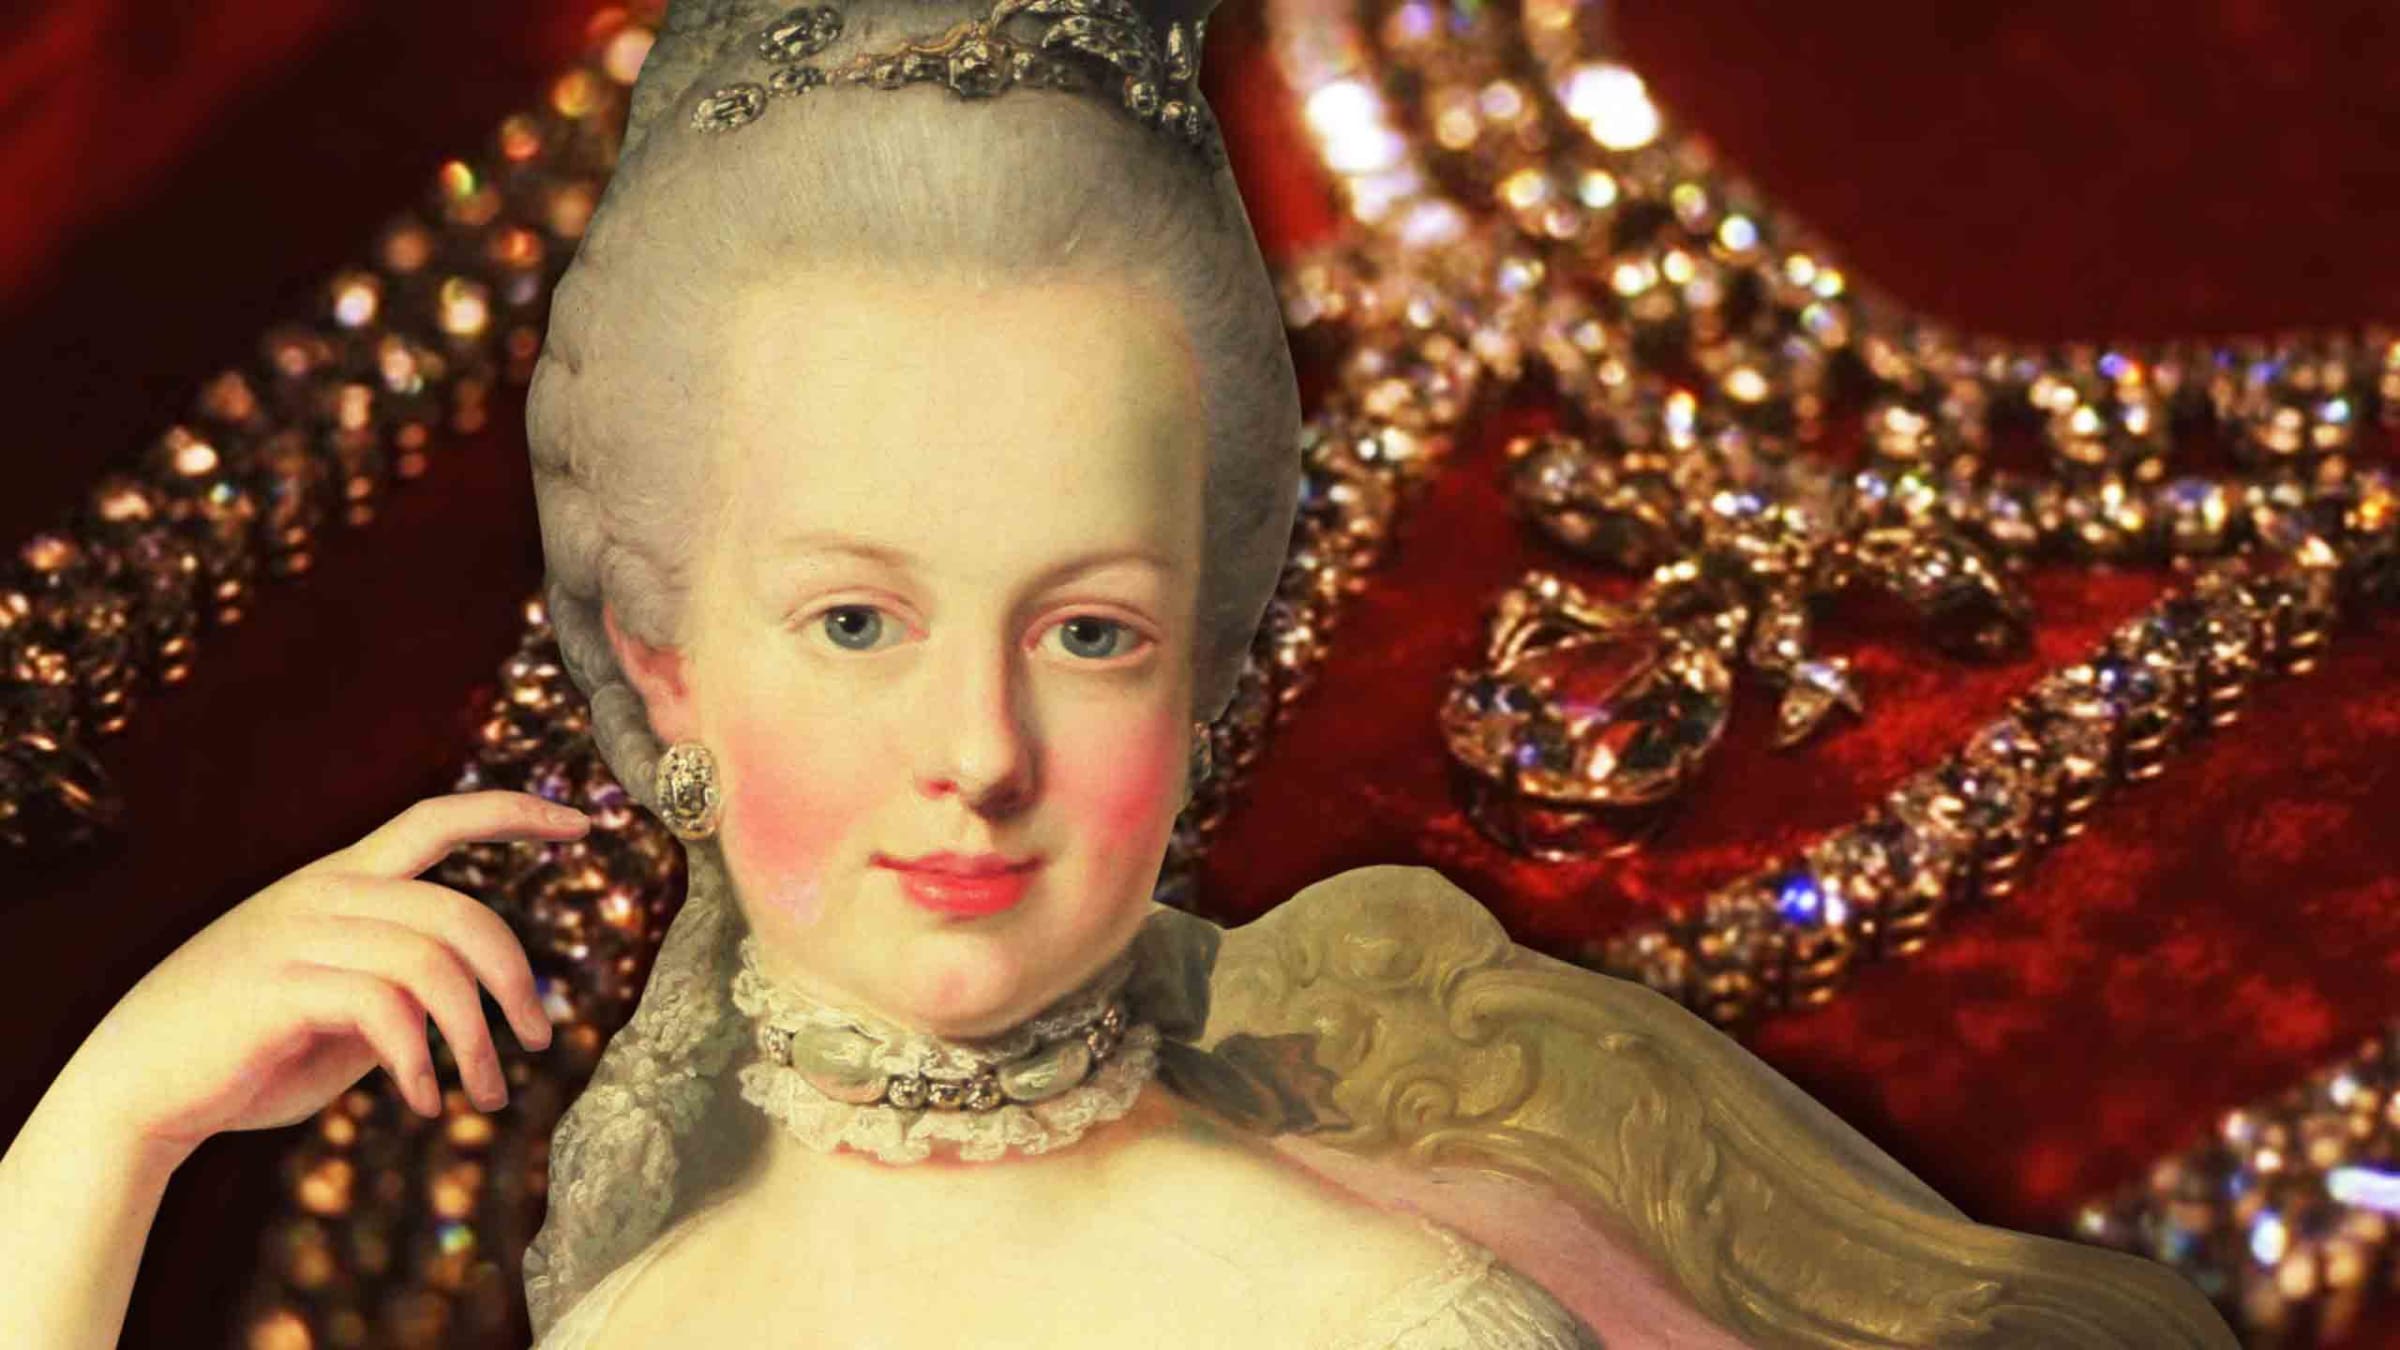 The Year of Marie Antoinette - The Affair of the Diamond Necklace